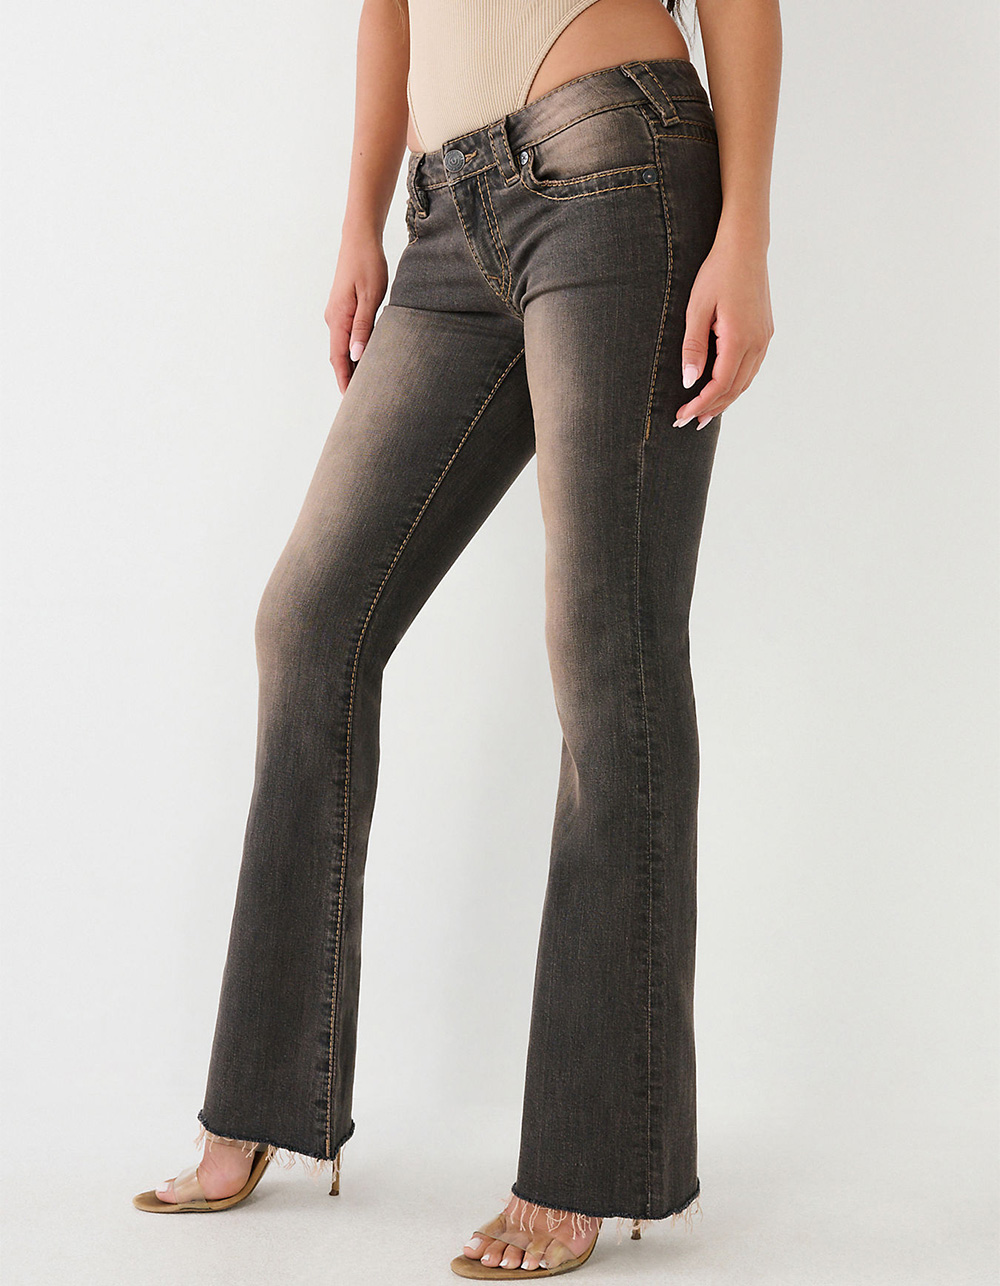 Women's Bootcut Jeans - Low-rise & High-rise